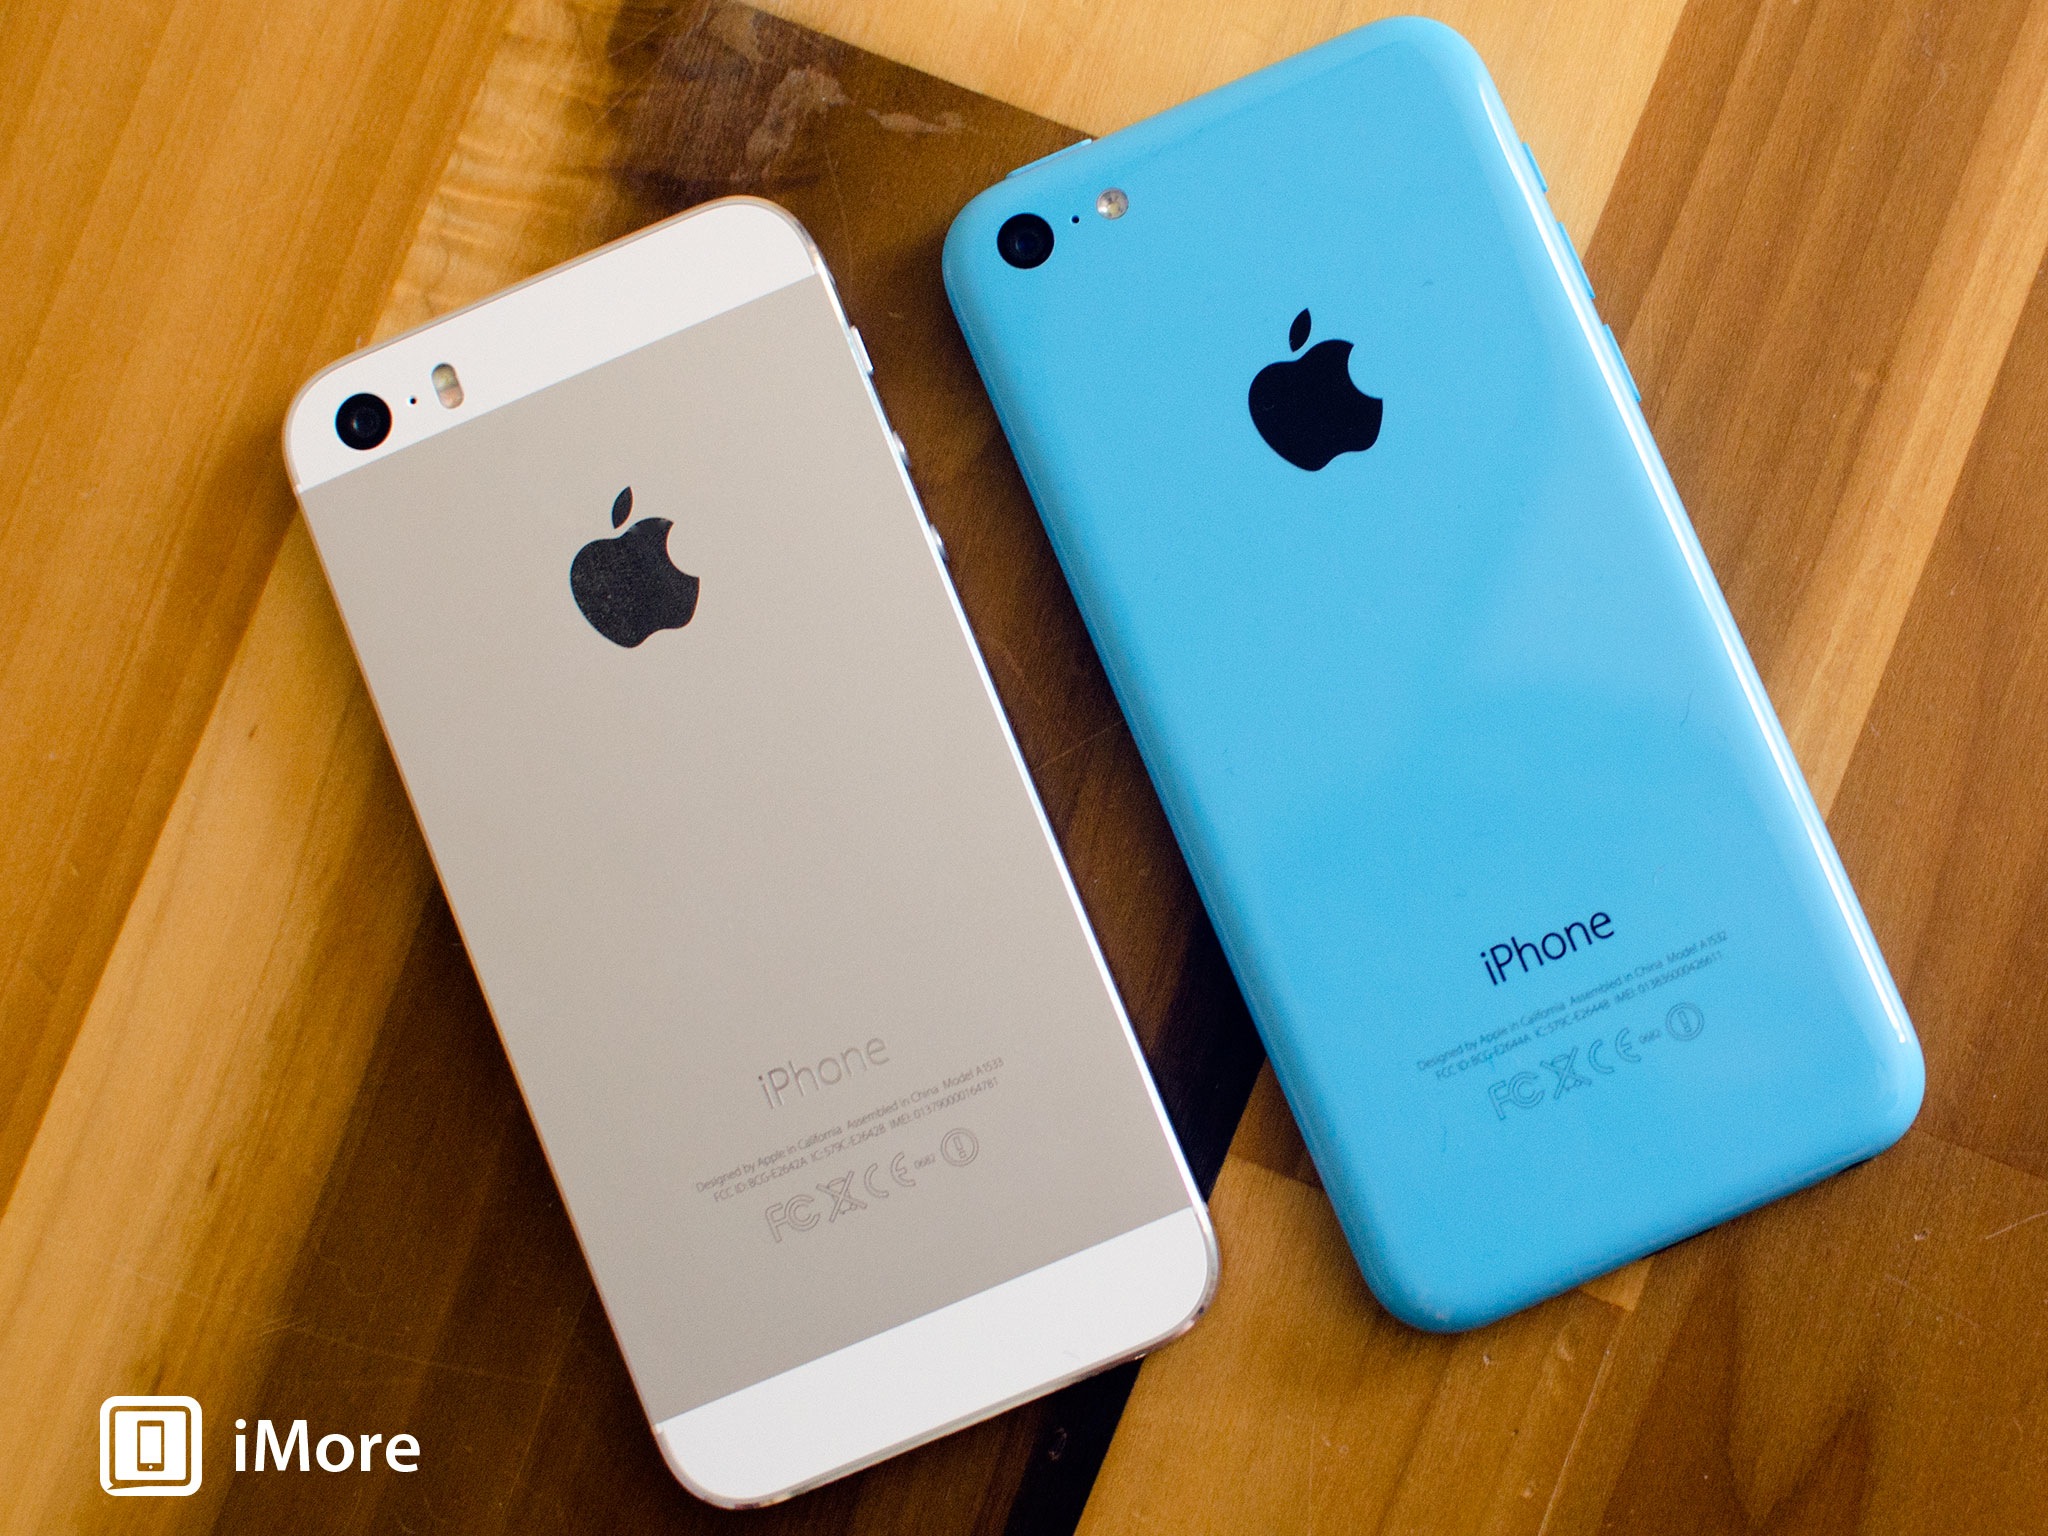 iPhone 5s and iPhone 5c reviews: 3 months later | iMore